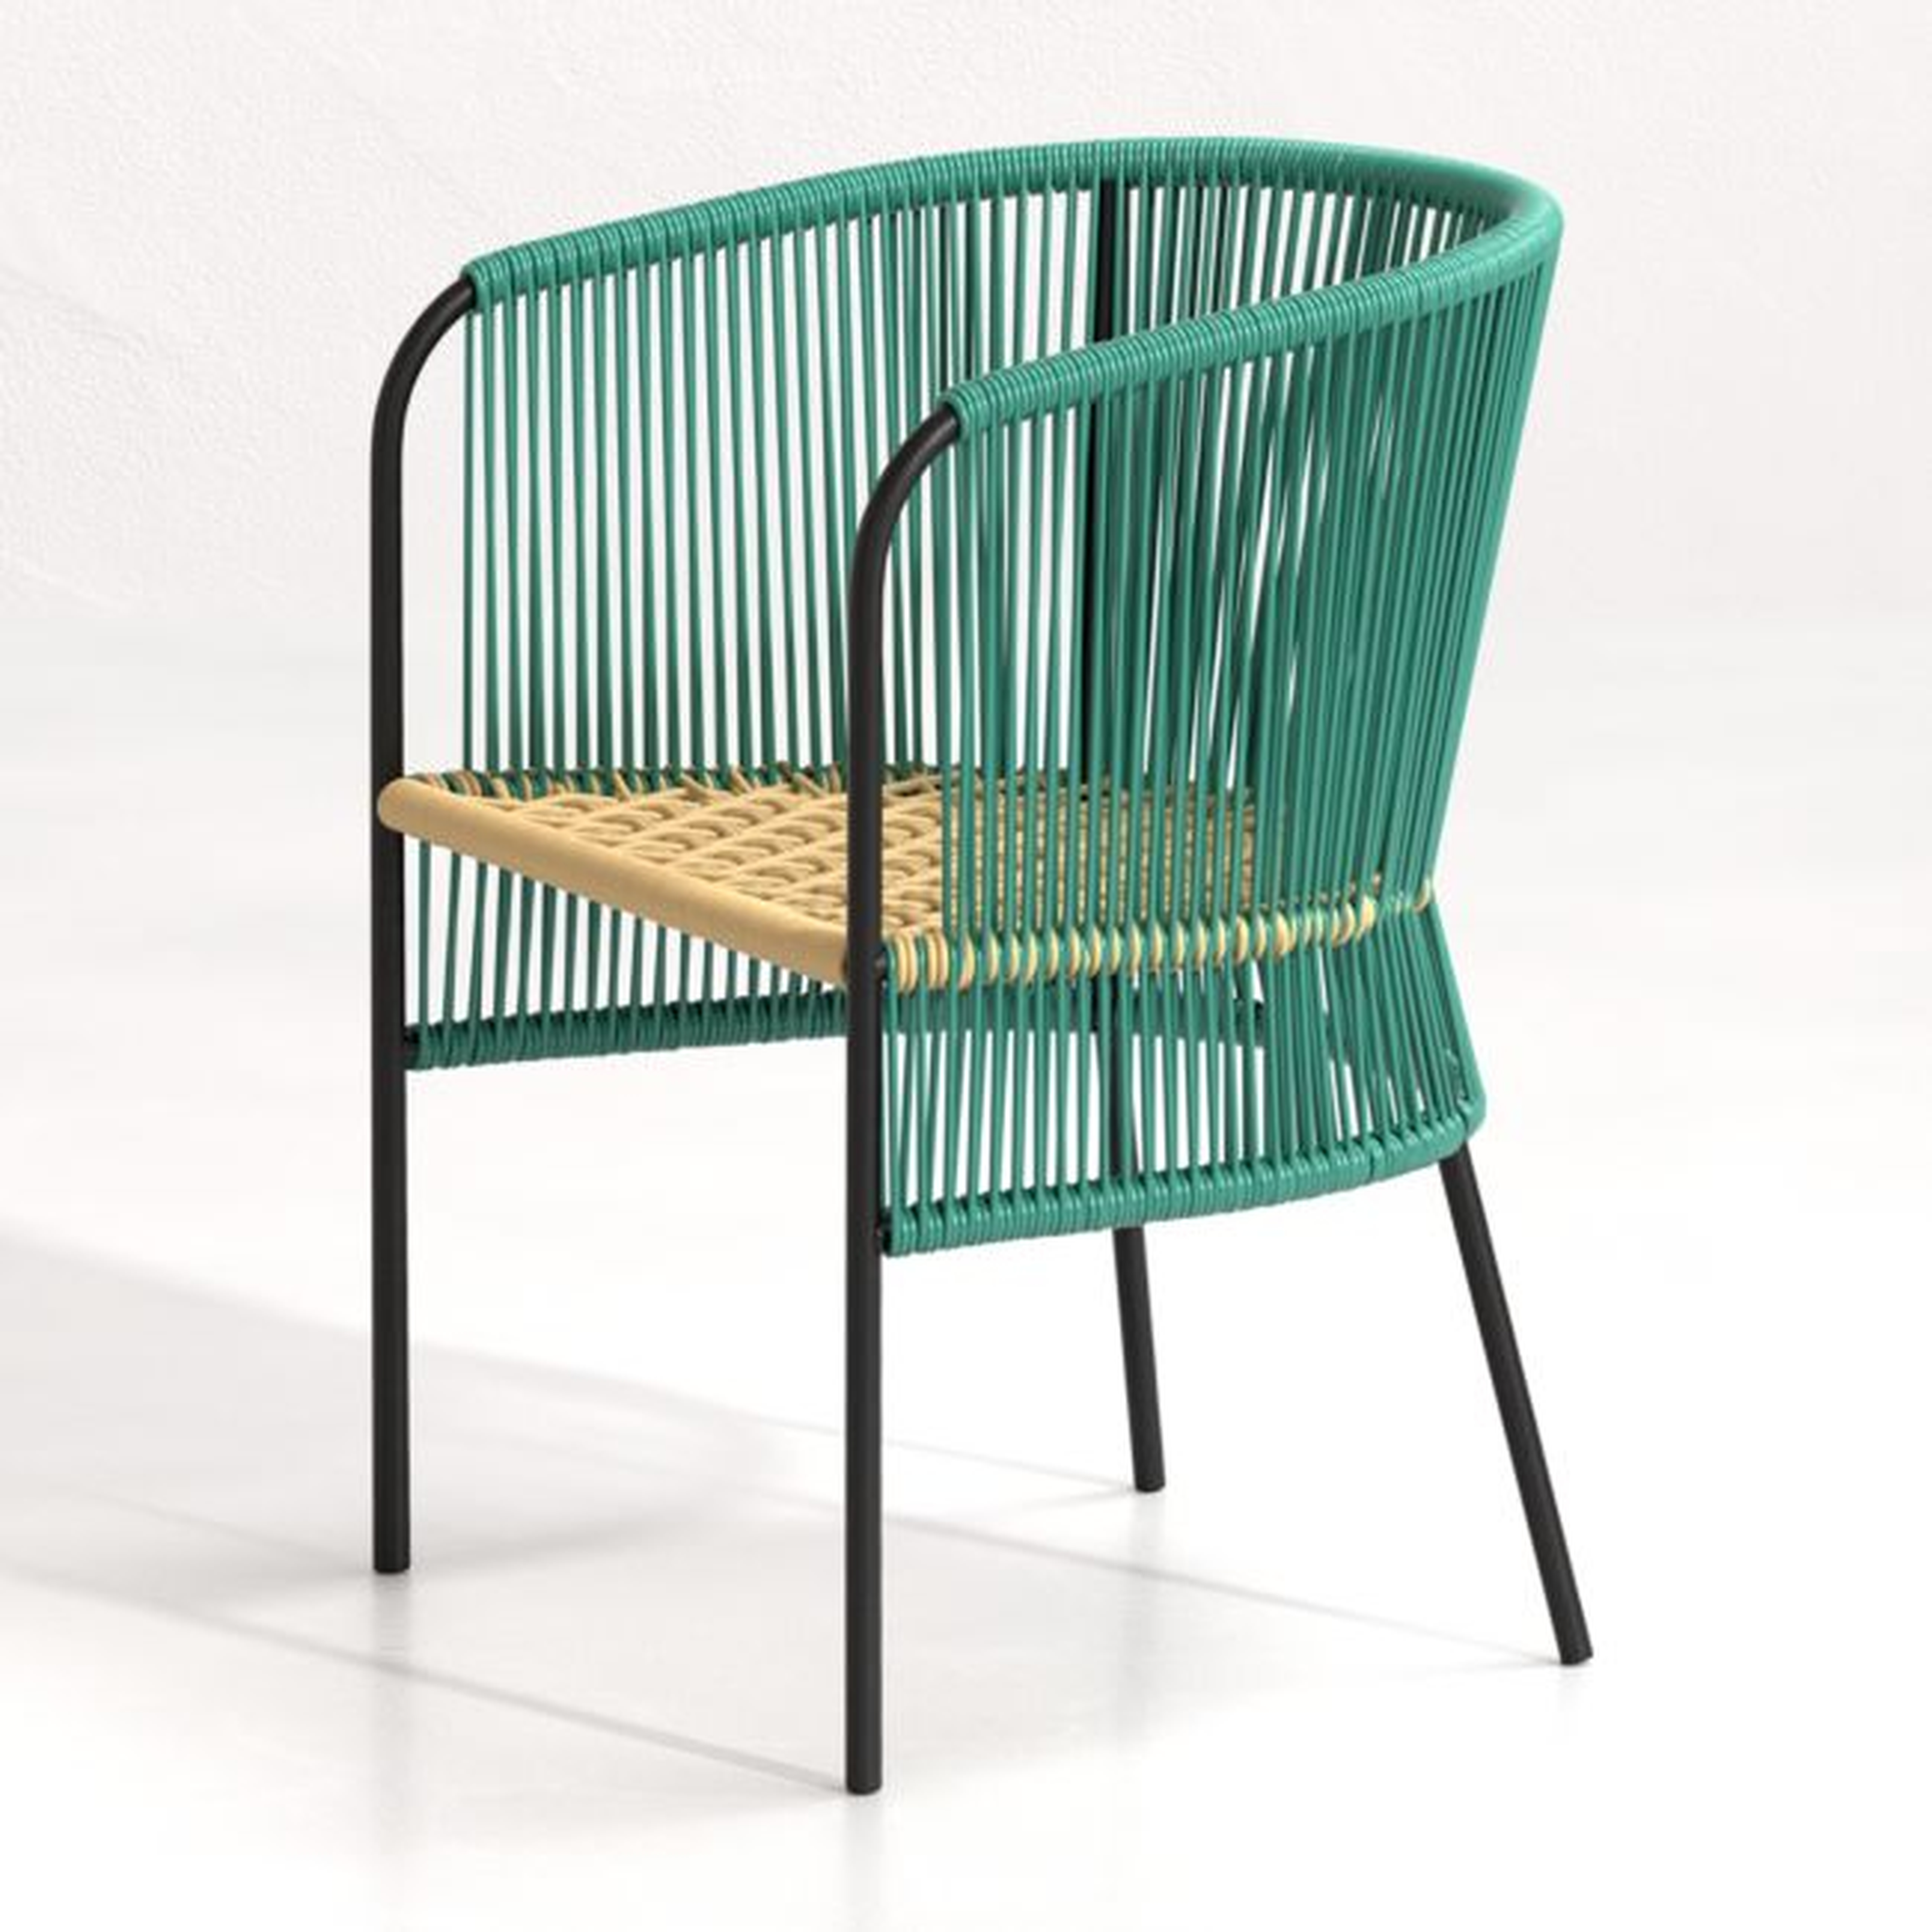 Verro Green Outdoor Dining Chair - Crate and Barrel